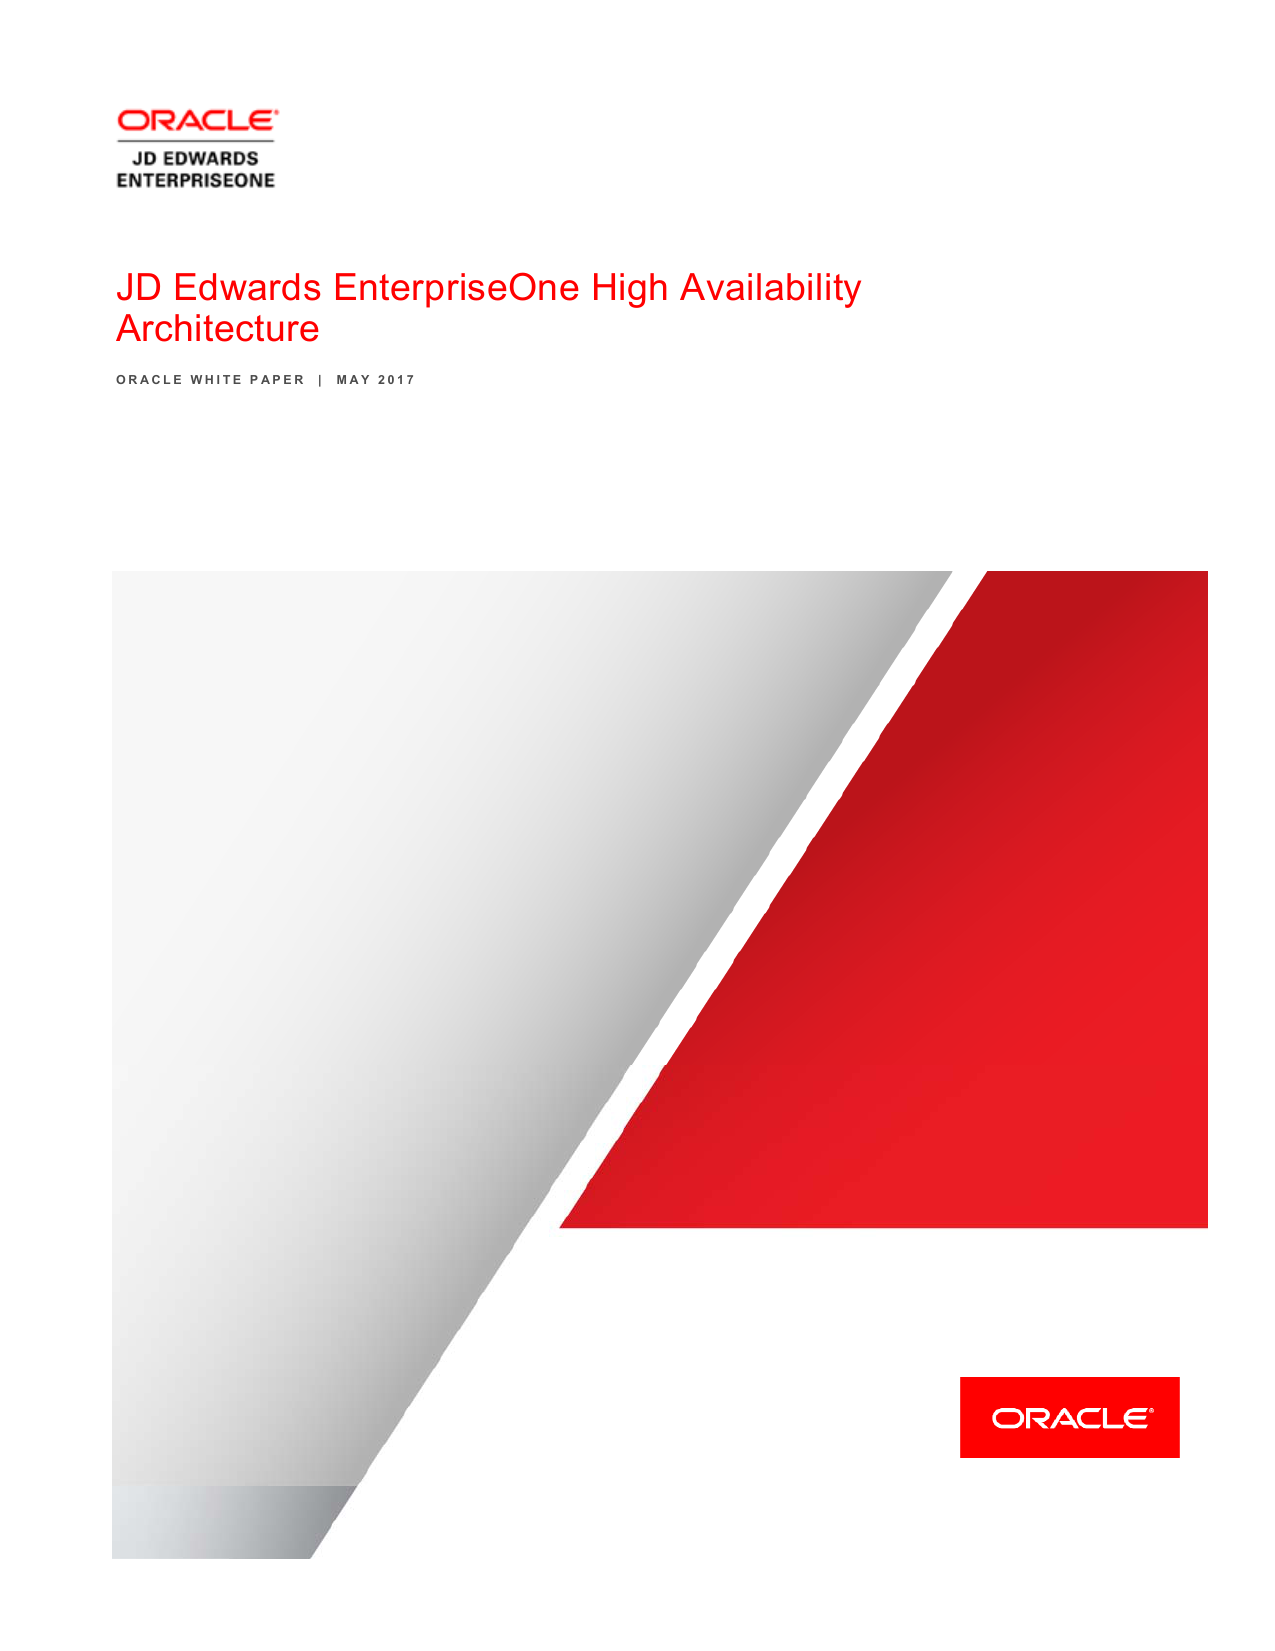 how to check jd edwards enterprise one version